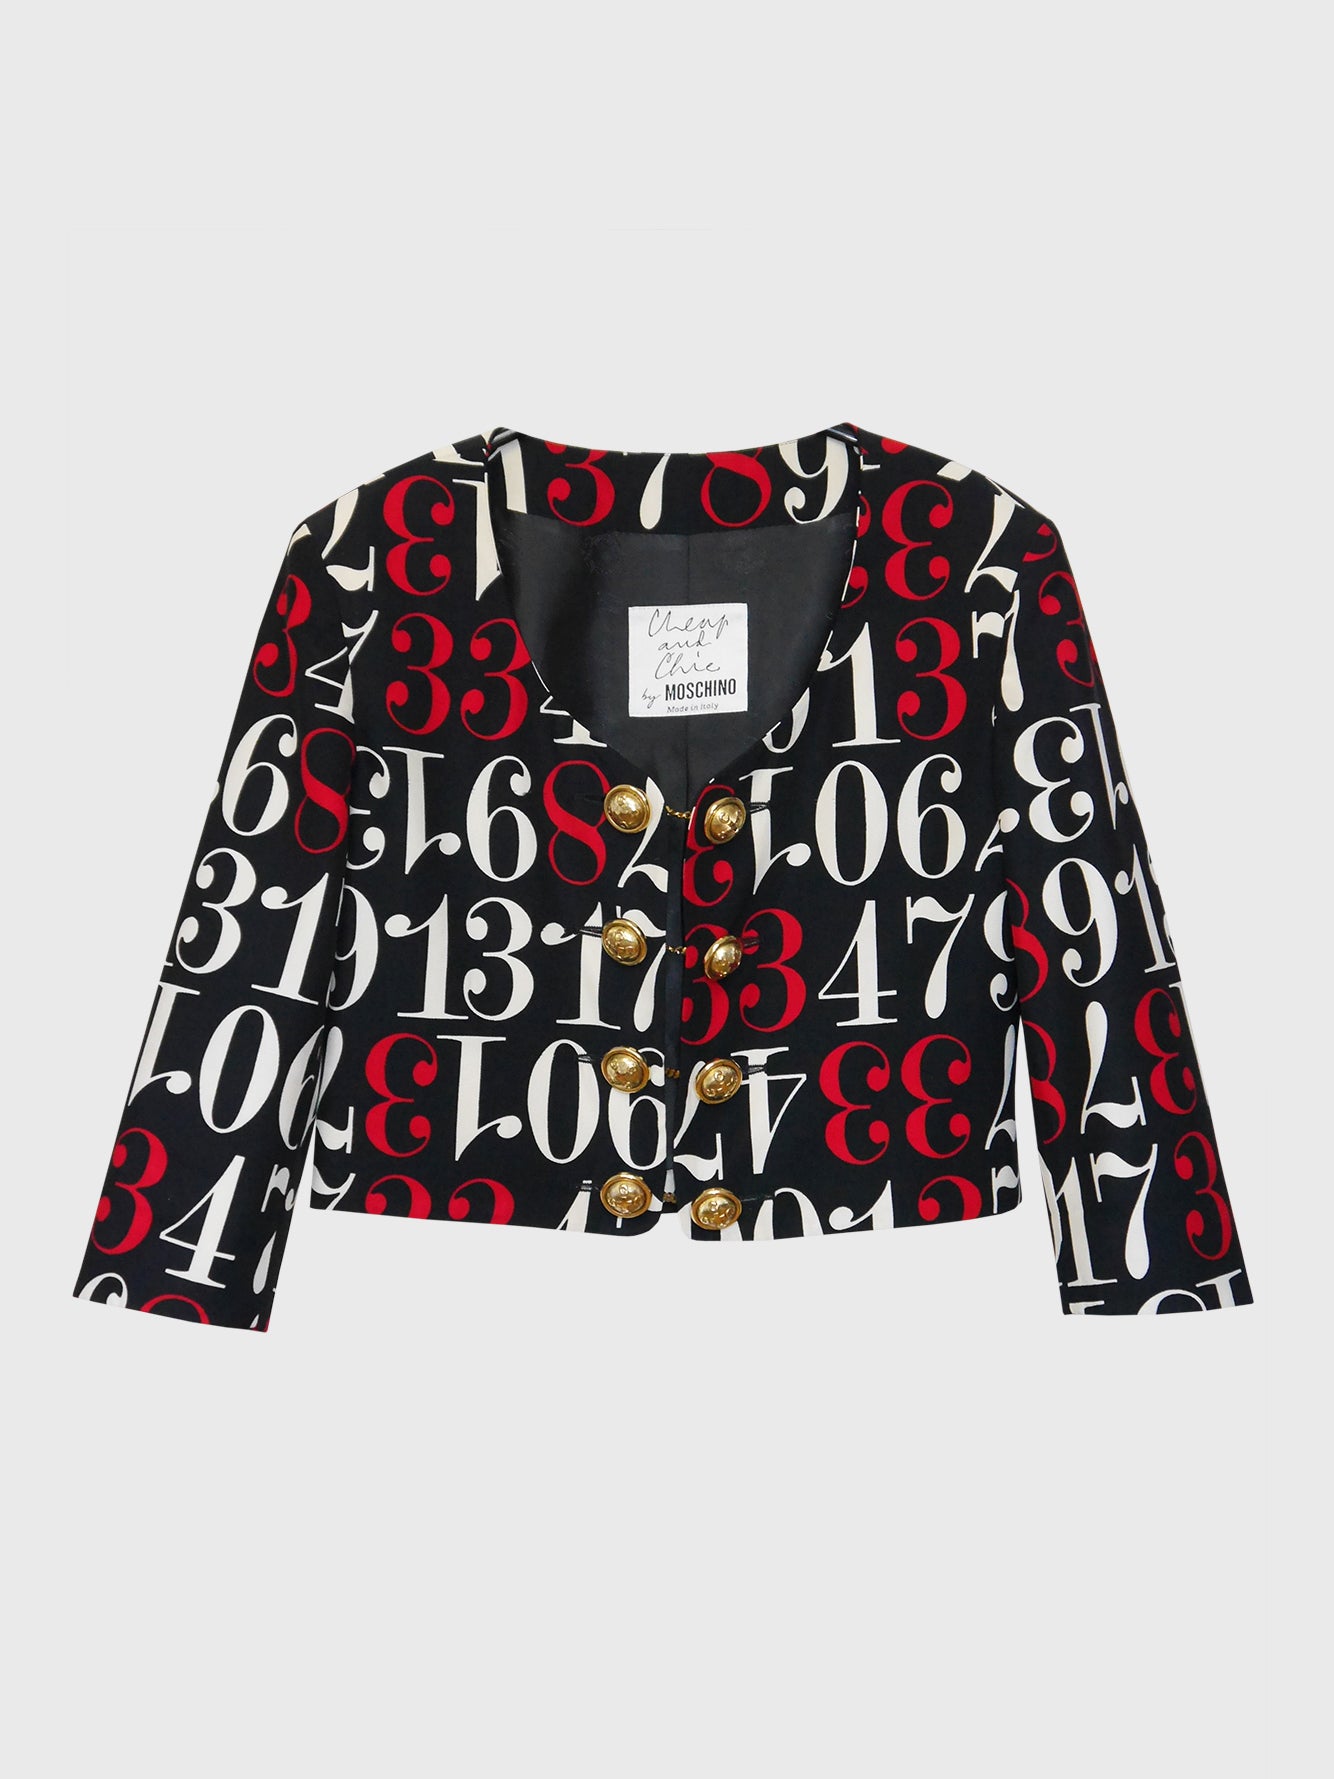 MOSCHINO 1990s Vintage Numbers Print Cropped Bolero Jacket w/ Cufflink Style Buttons Size XS